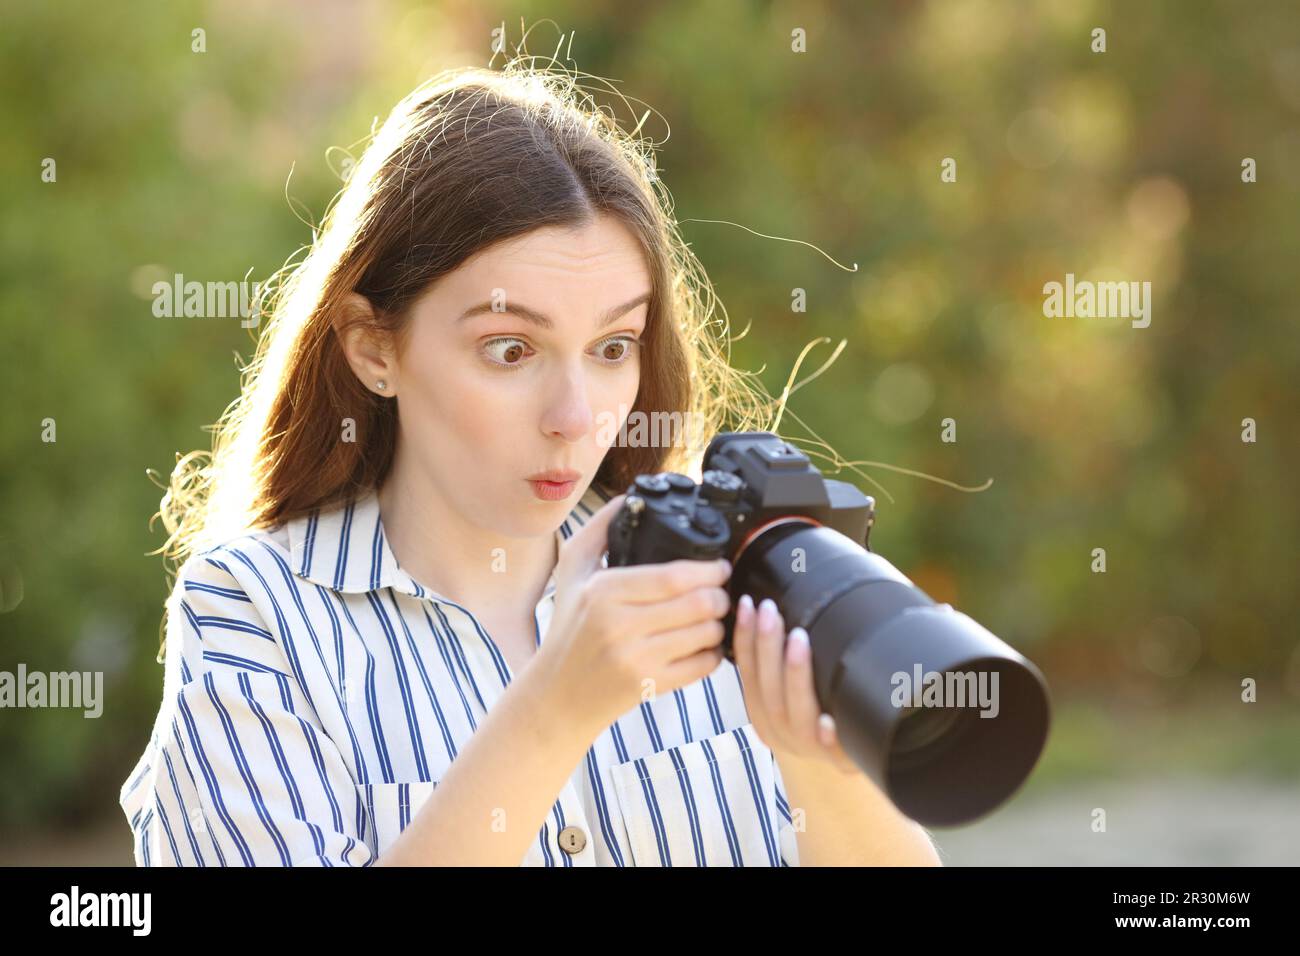 Amazed photographer checking result on mirrorless camera in a park Stock Photo